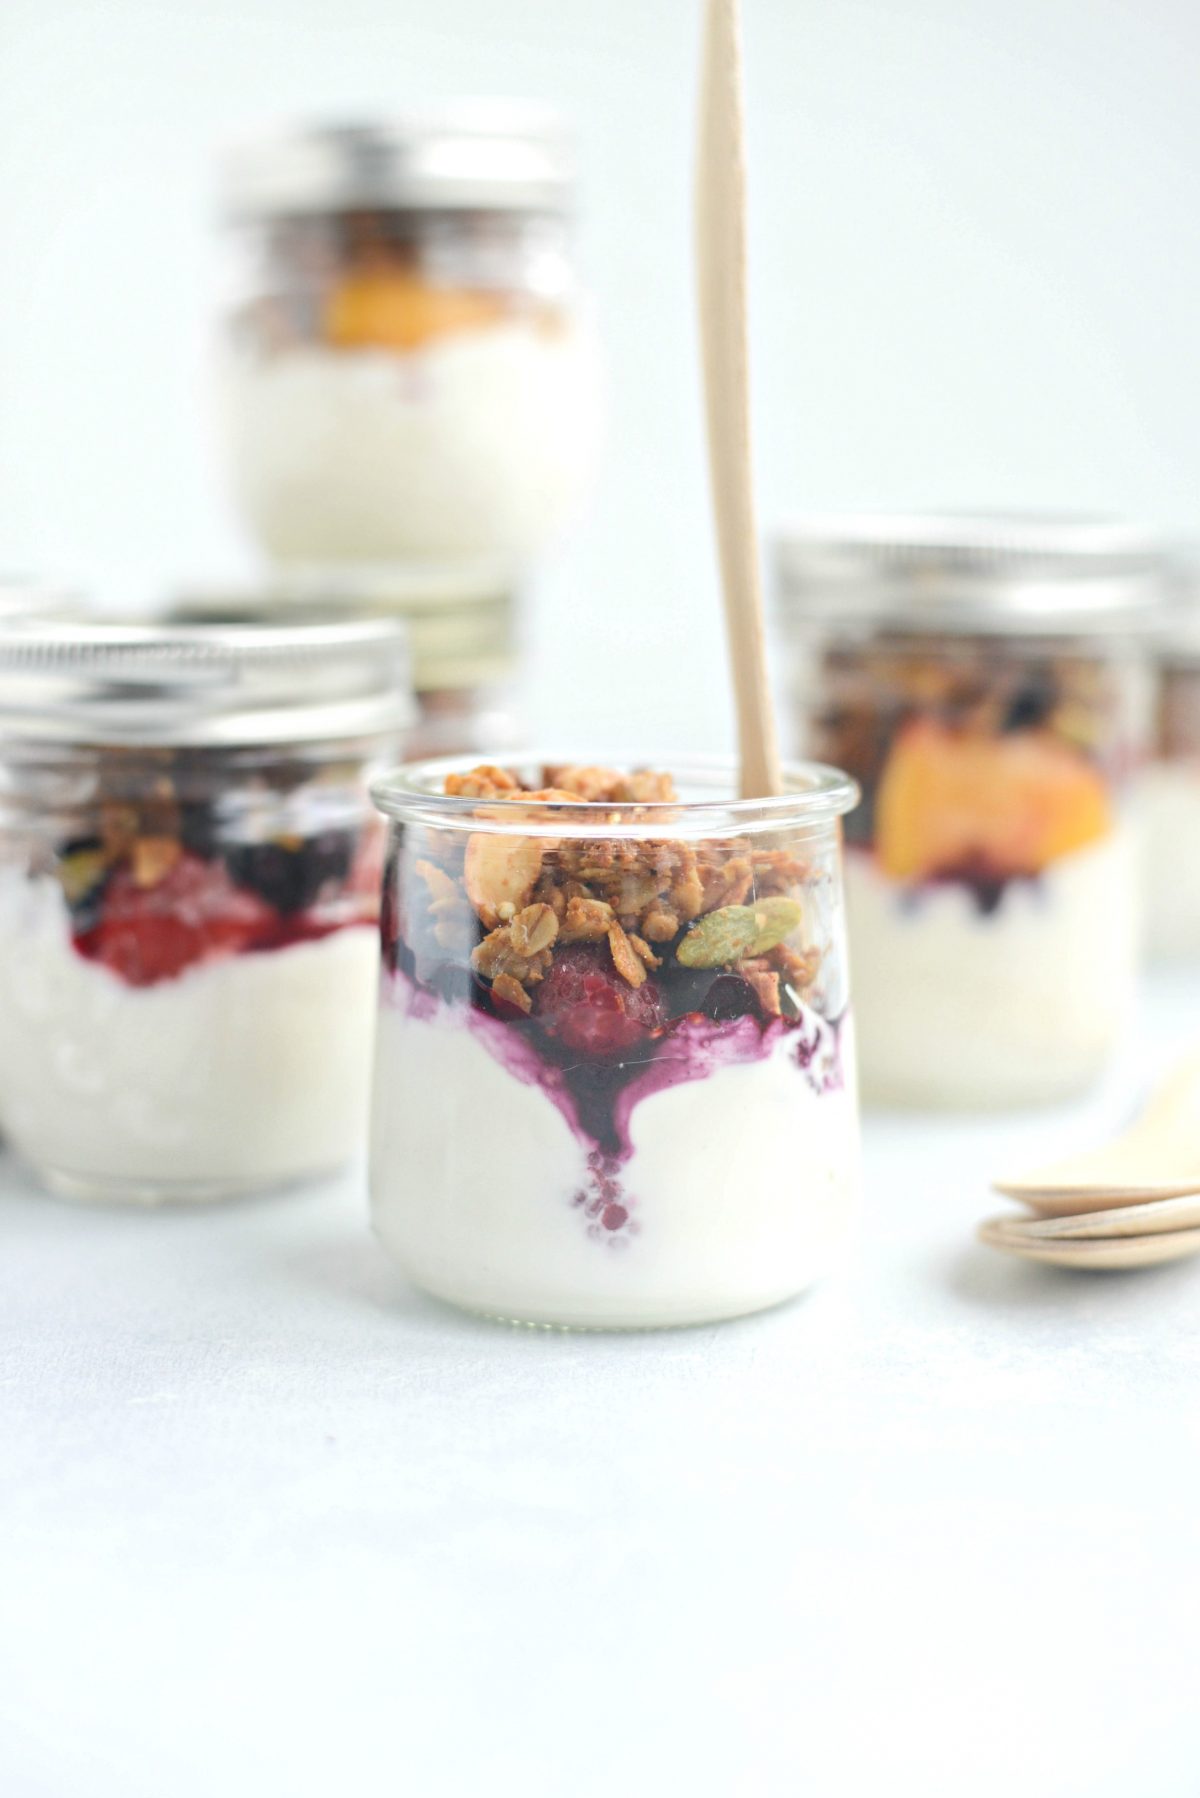 Yogurt Parfaits in a Mason Jar Are Perfect for Breakfasts on the Go